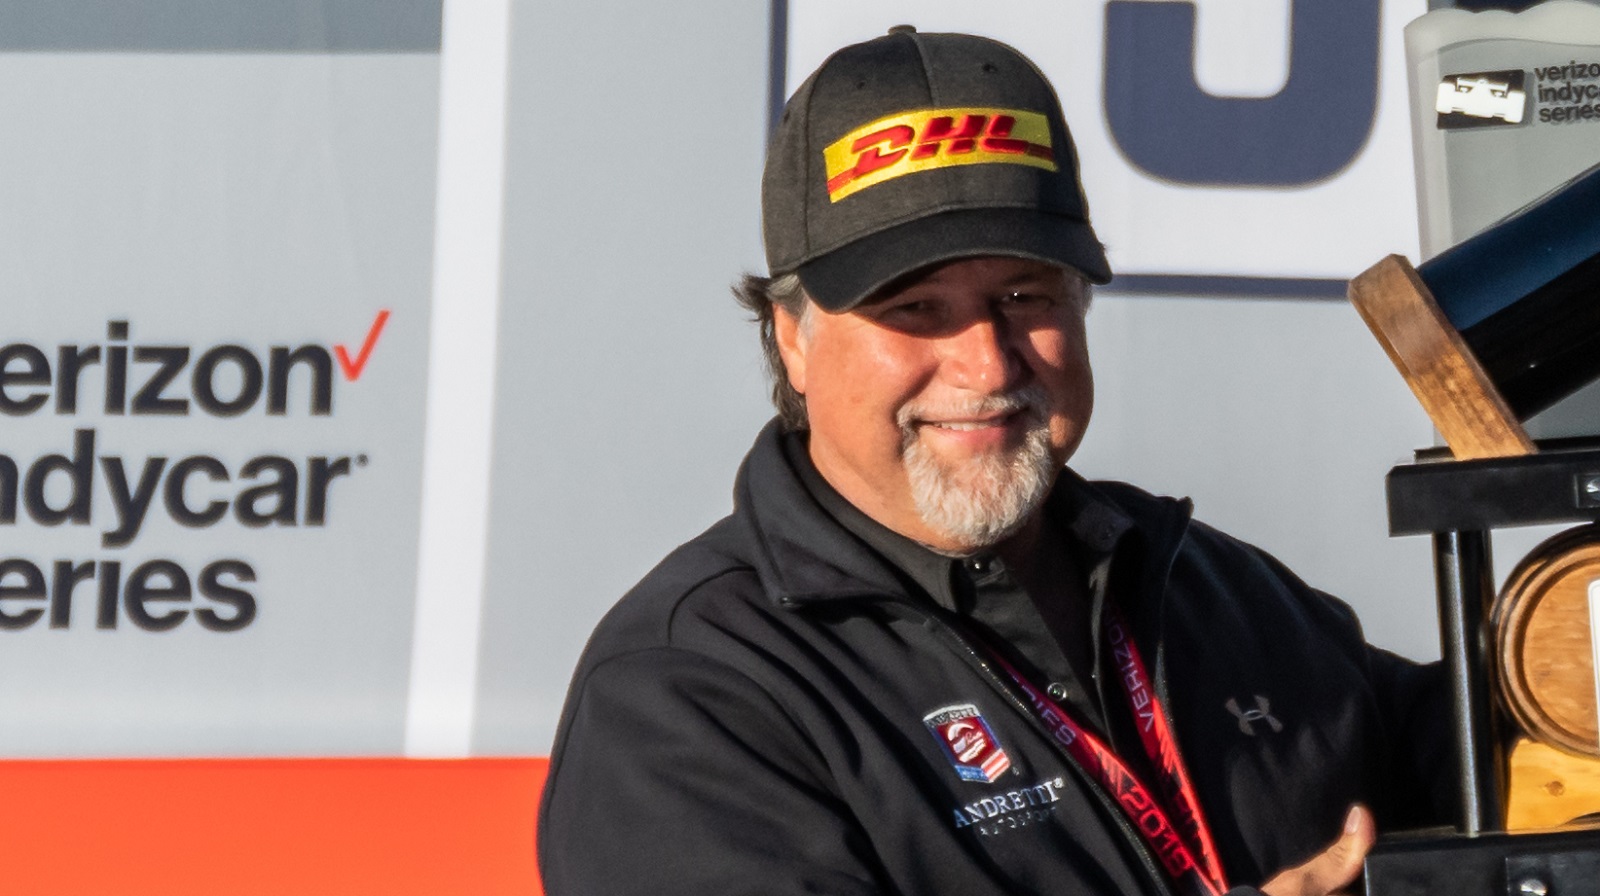 Michael Andretti accepts the race trophy at the IndyCar Grand Prix of Sonoma on  Sept. 16, 2018. | Douglas Stringer/Icon Sportswire via Getty Images